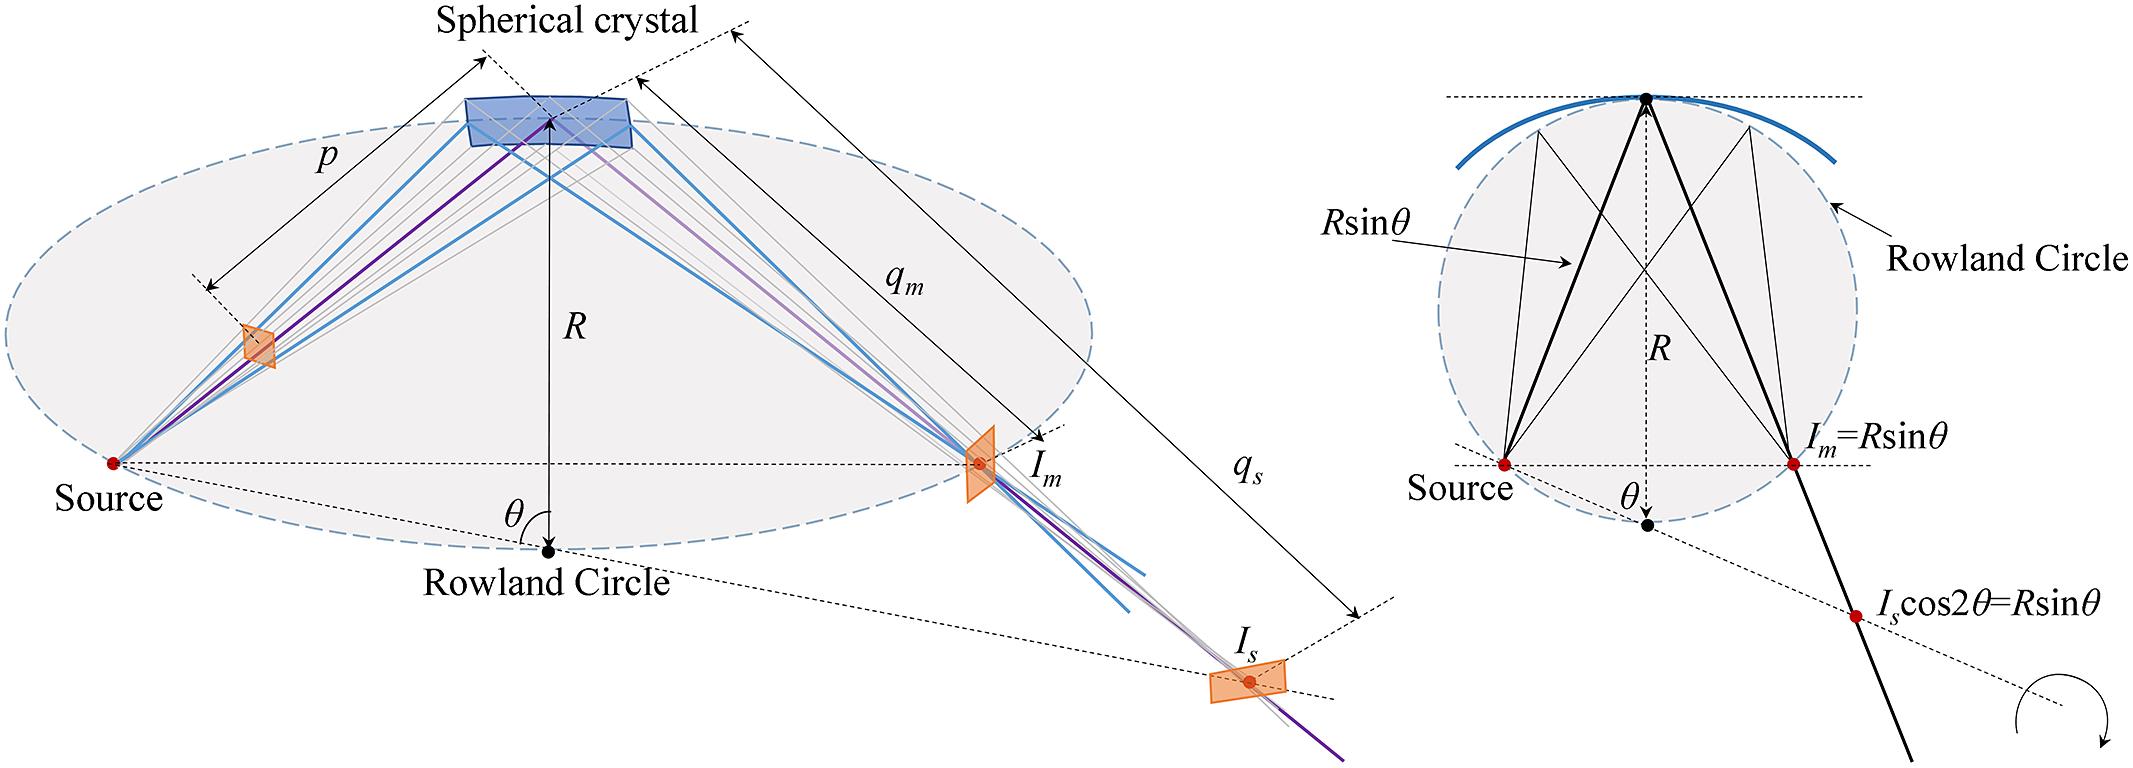 Working principle of a spherical crystal-based imaging system. The X-rays emitted by the source are focused at point (Im) on the Rowland circle after being diffracted by the spherical crystal. However, in the sagittal plane, the crystal can focus the X-rays at the focal point (Is) of the plane. The effect of the spherical crystal on the X-rays is equivalent to that of a concave mirror in the sagittal plane.